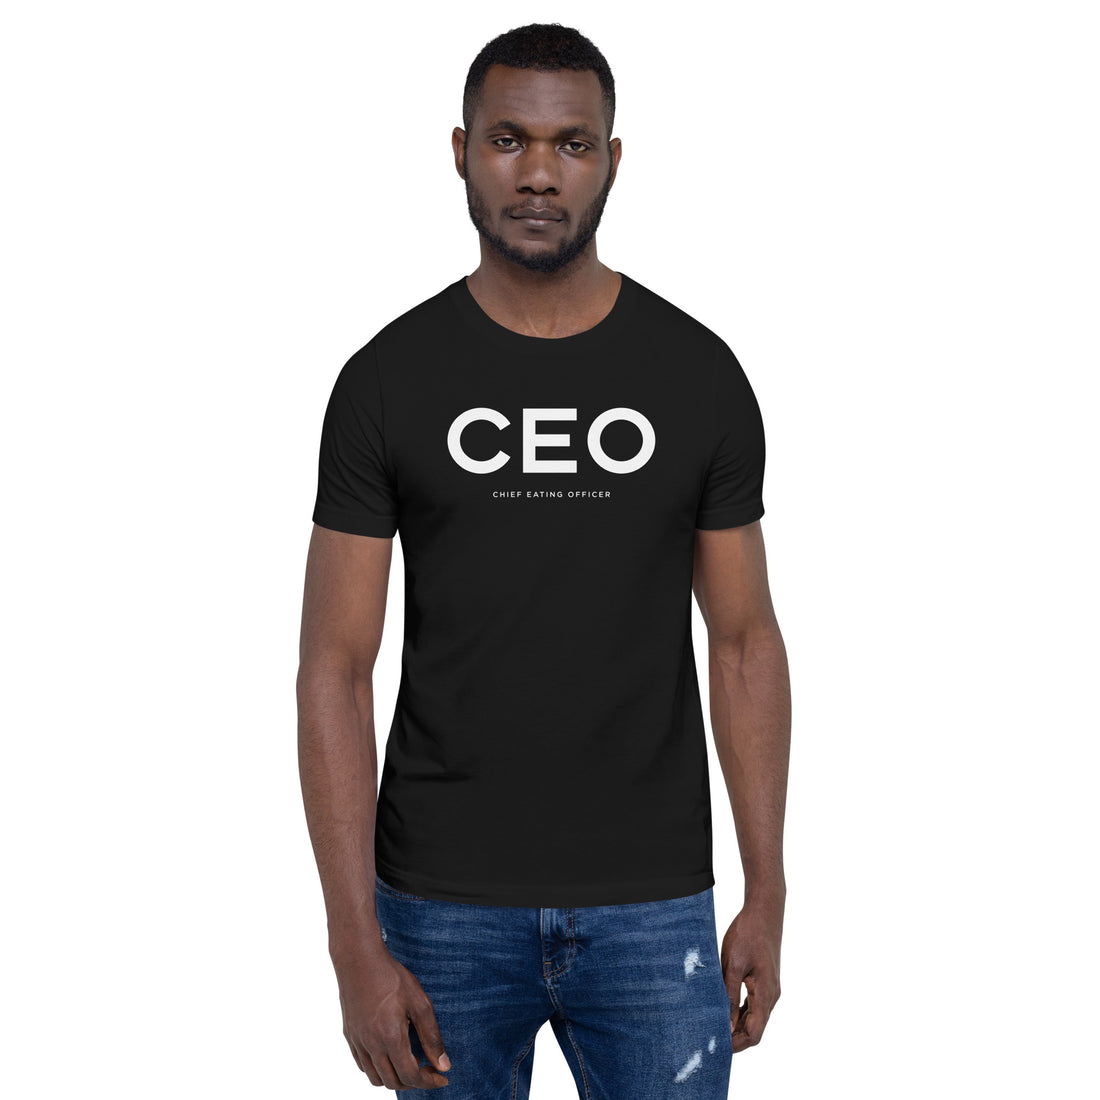 Chief Eating Officer – Unisex t-shirt